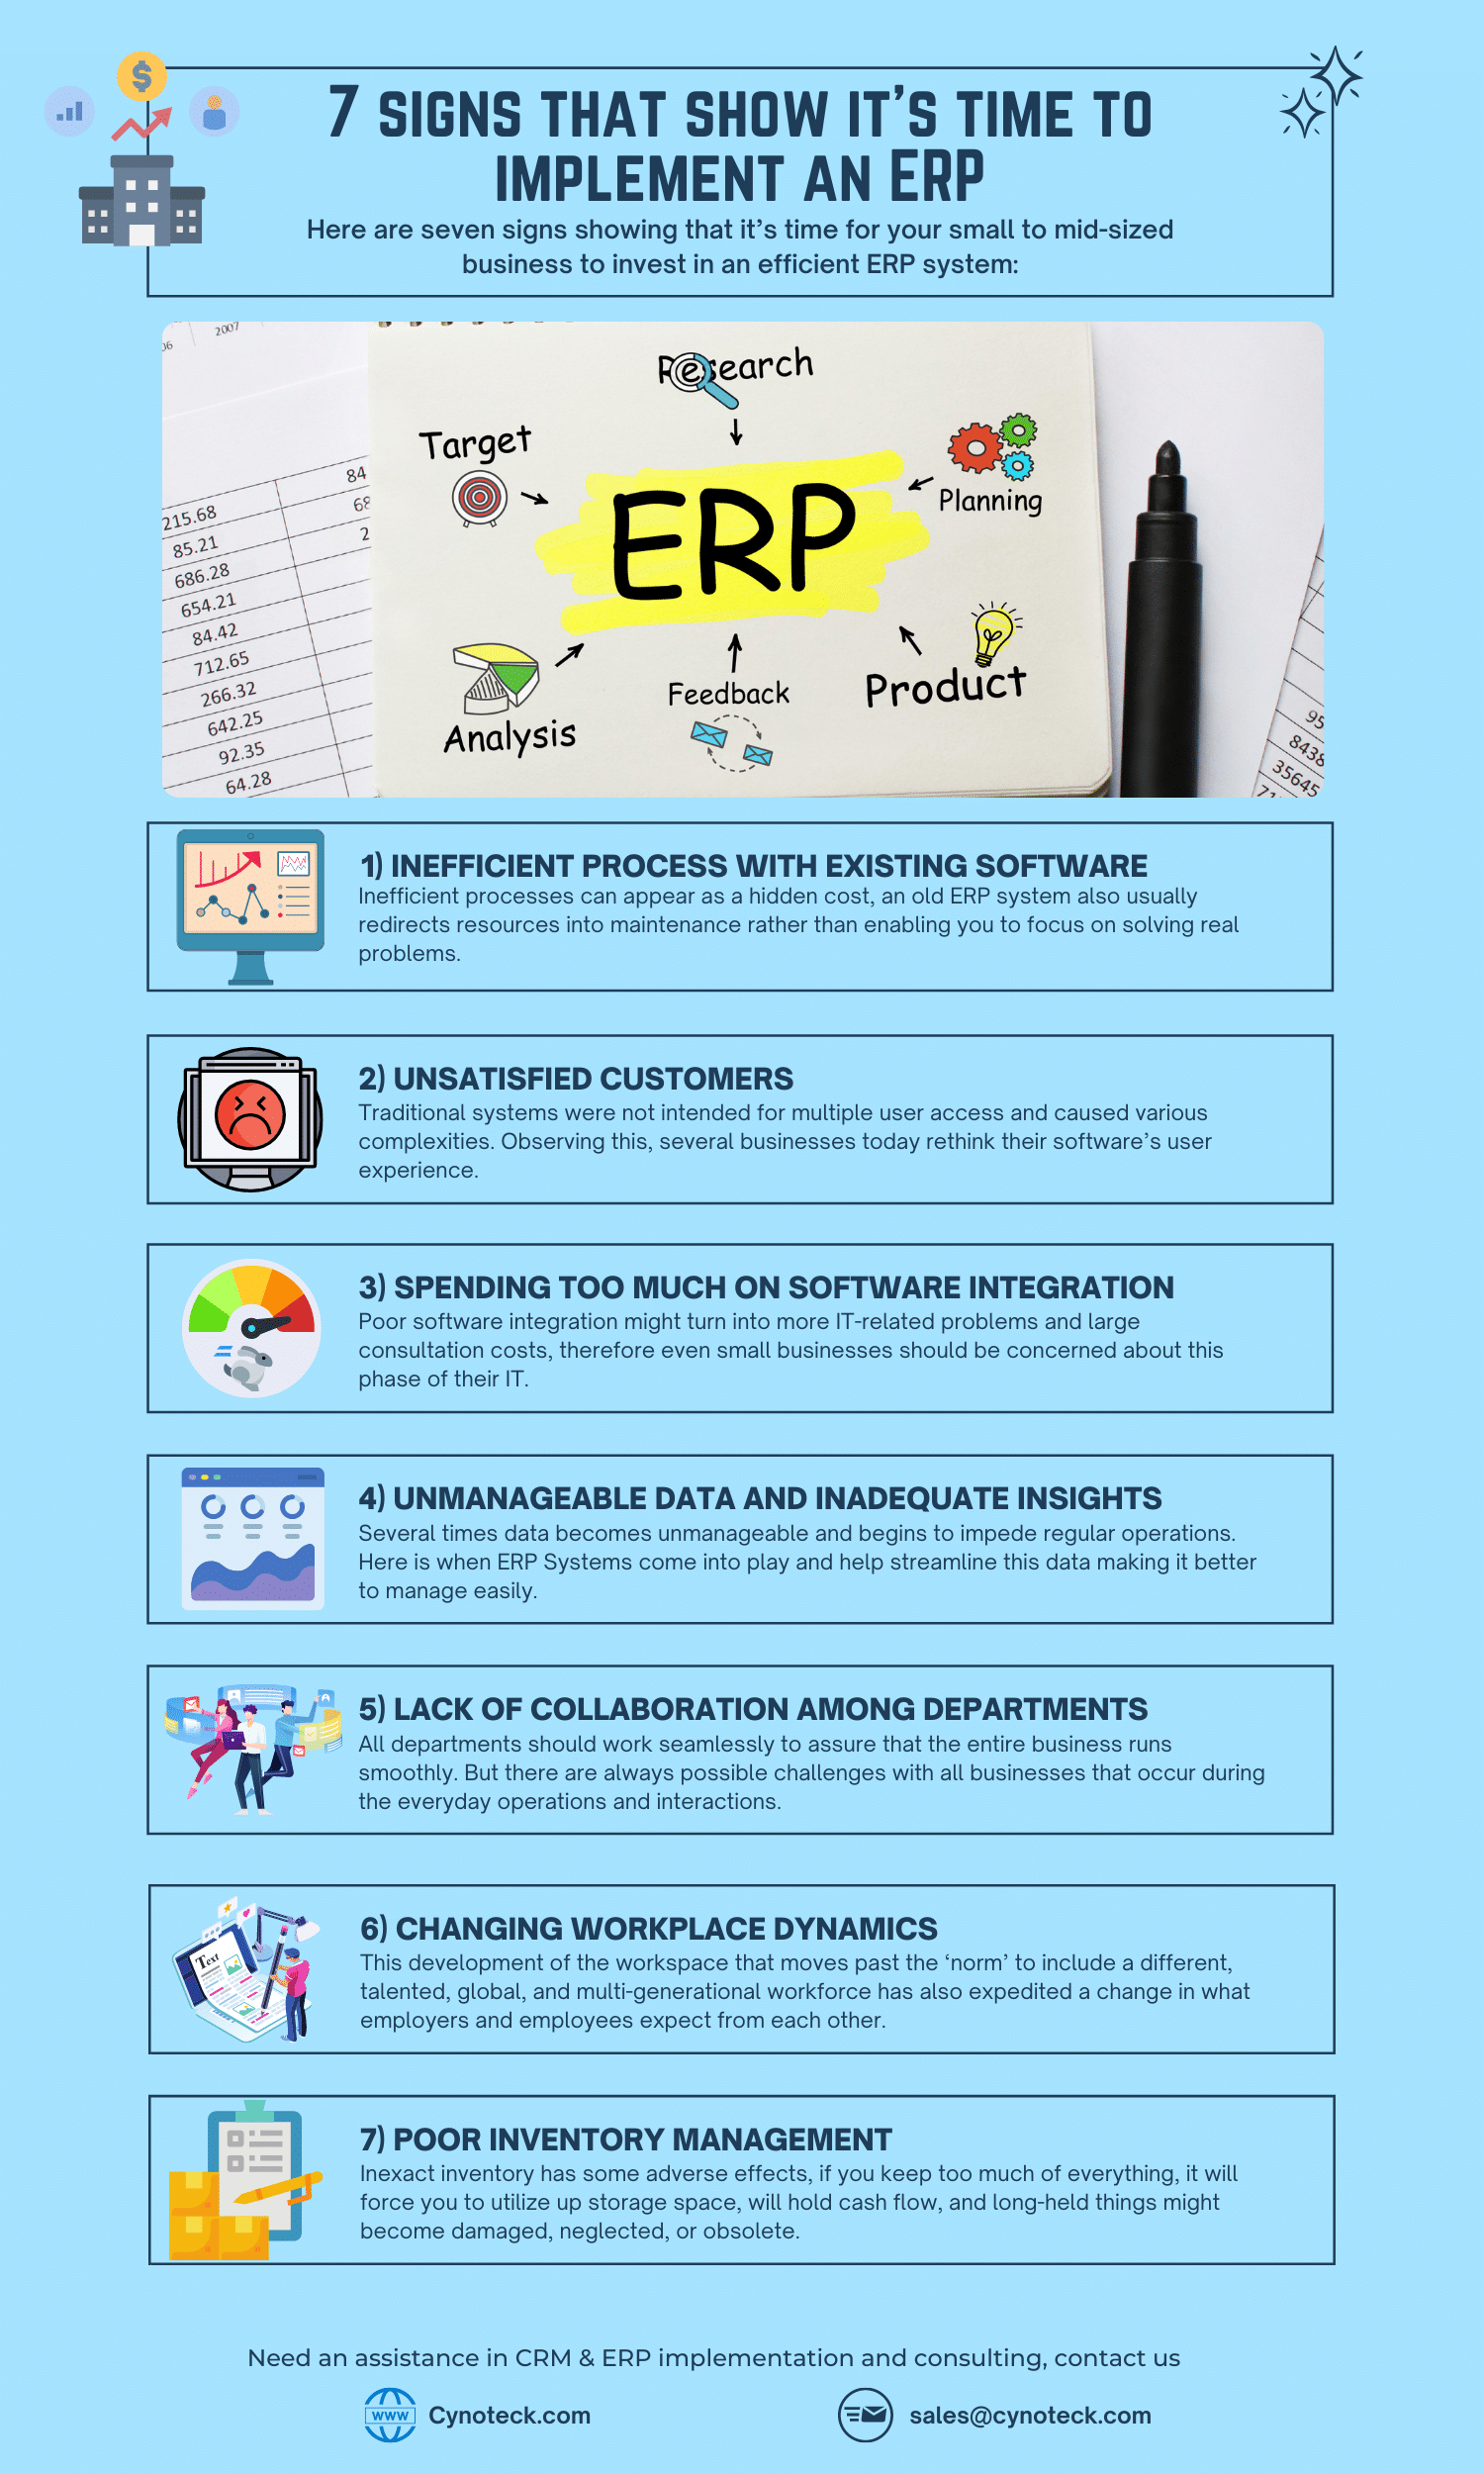 Do small businesses need an ERP system? 7 Signs it's time to implement ...